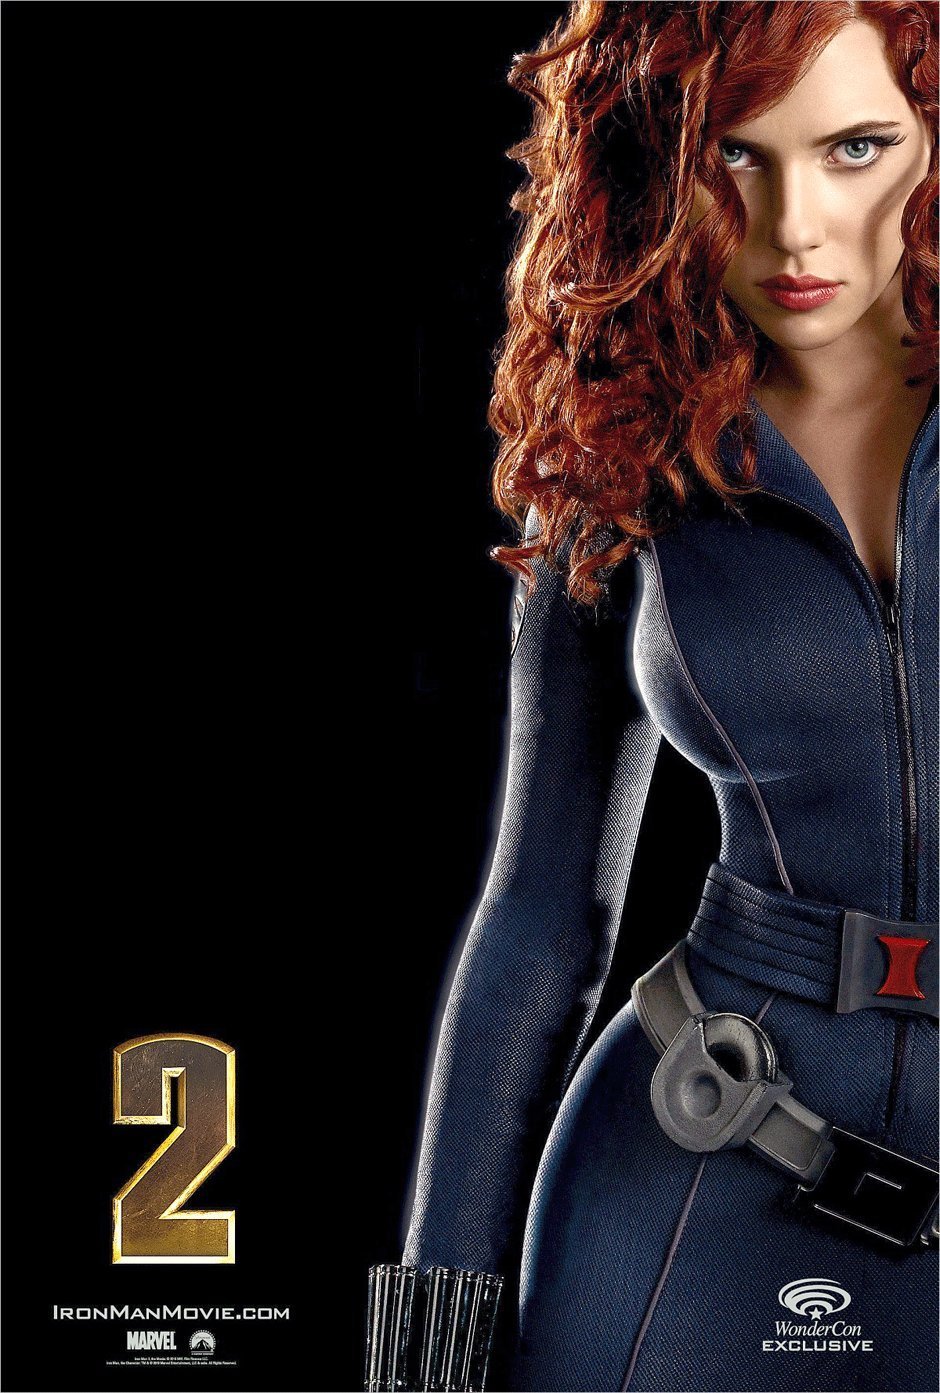 PHOTOS Scarlett Johansson Black Widow movie posters in a skin-tight catsuit  * 